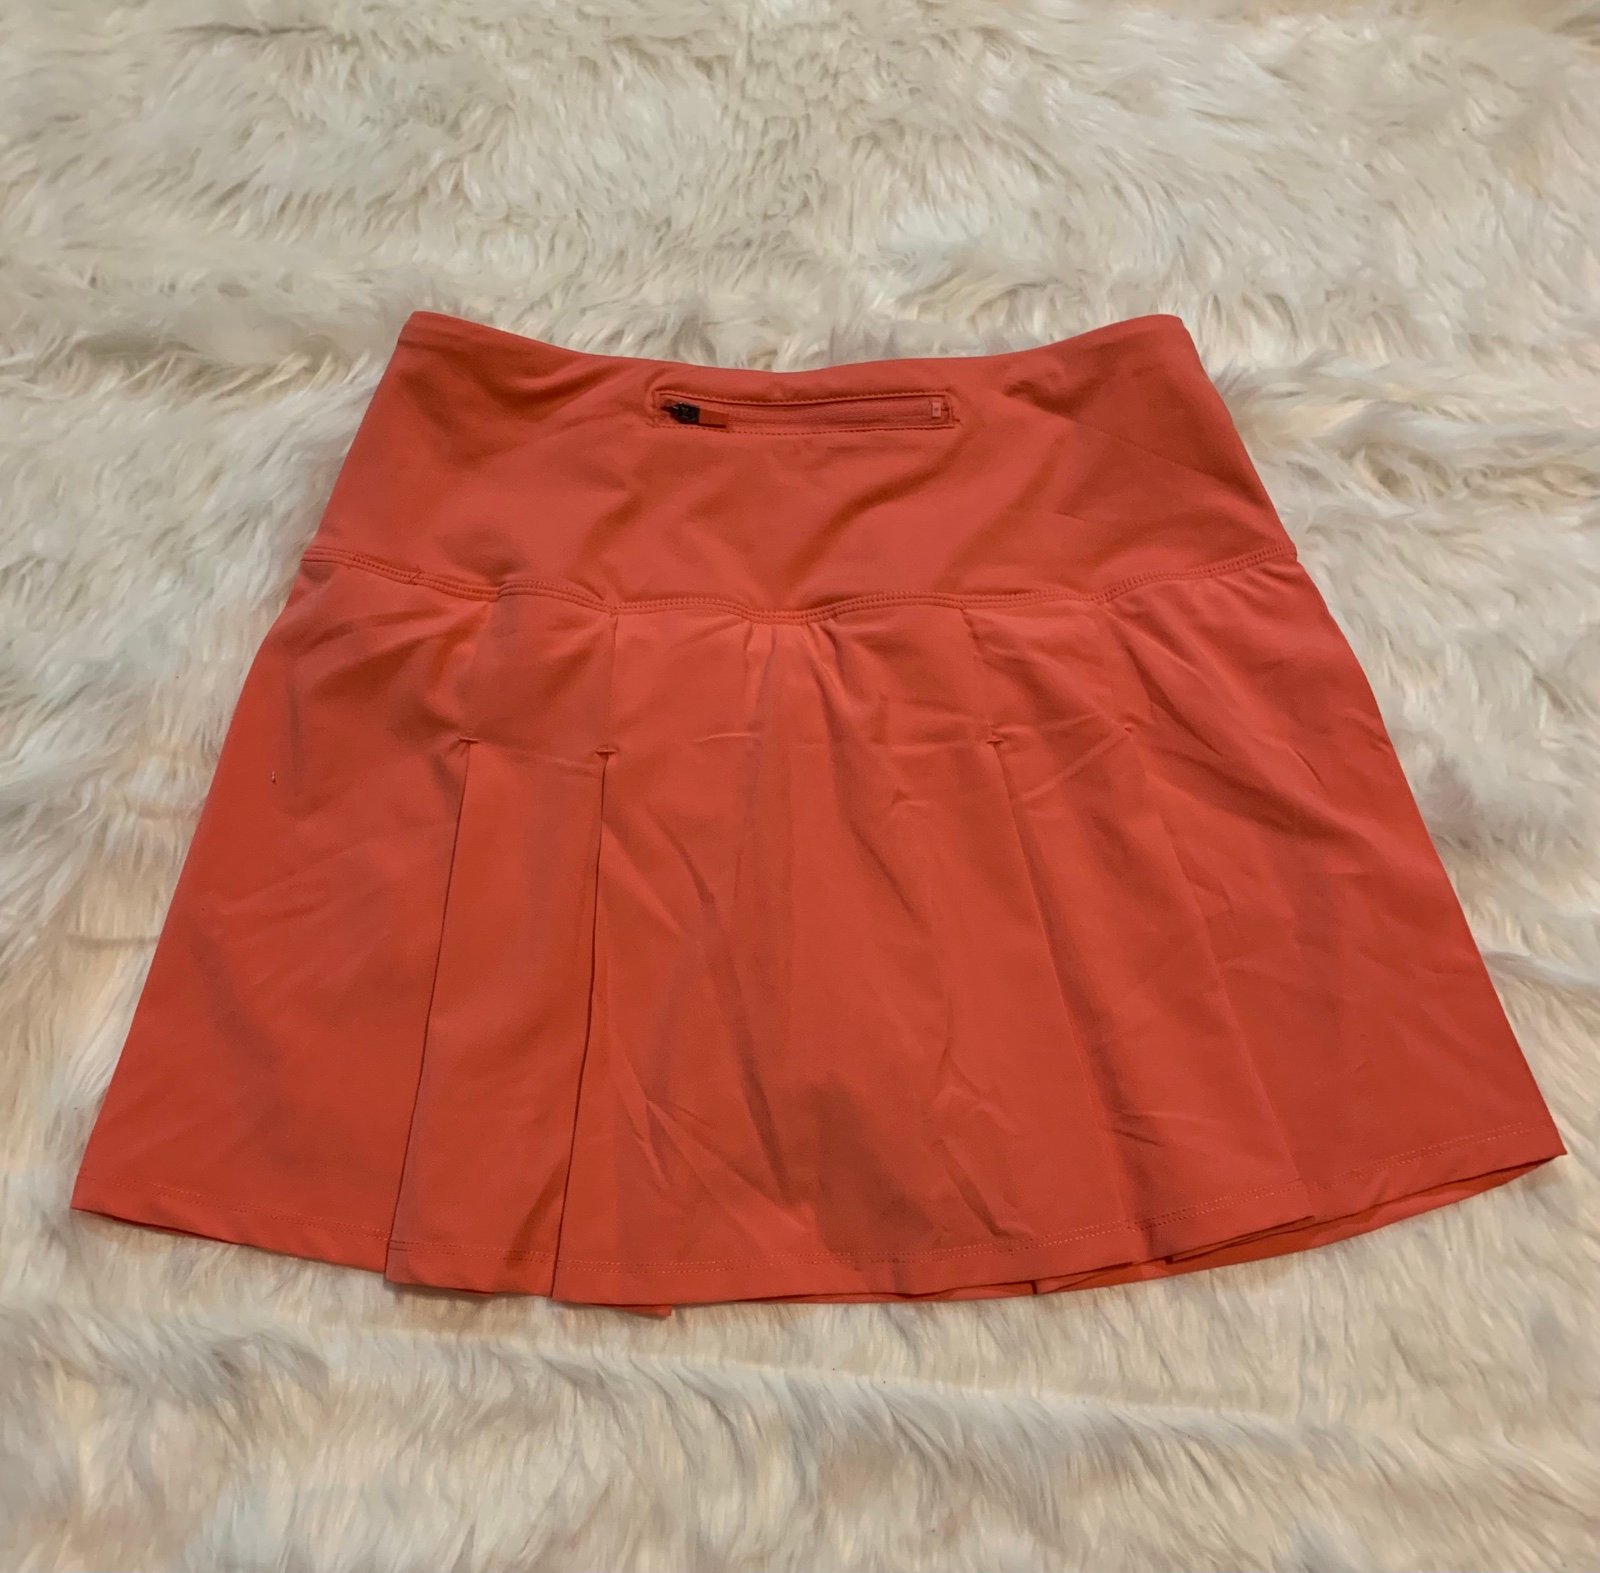 Discounted Women Tennis Skort S NWT n4m8xiQet for sale